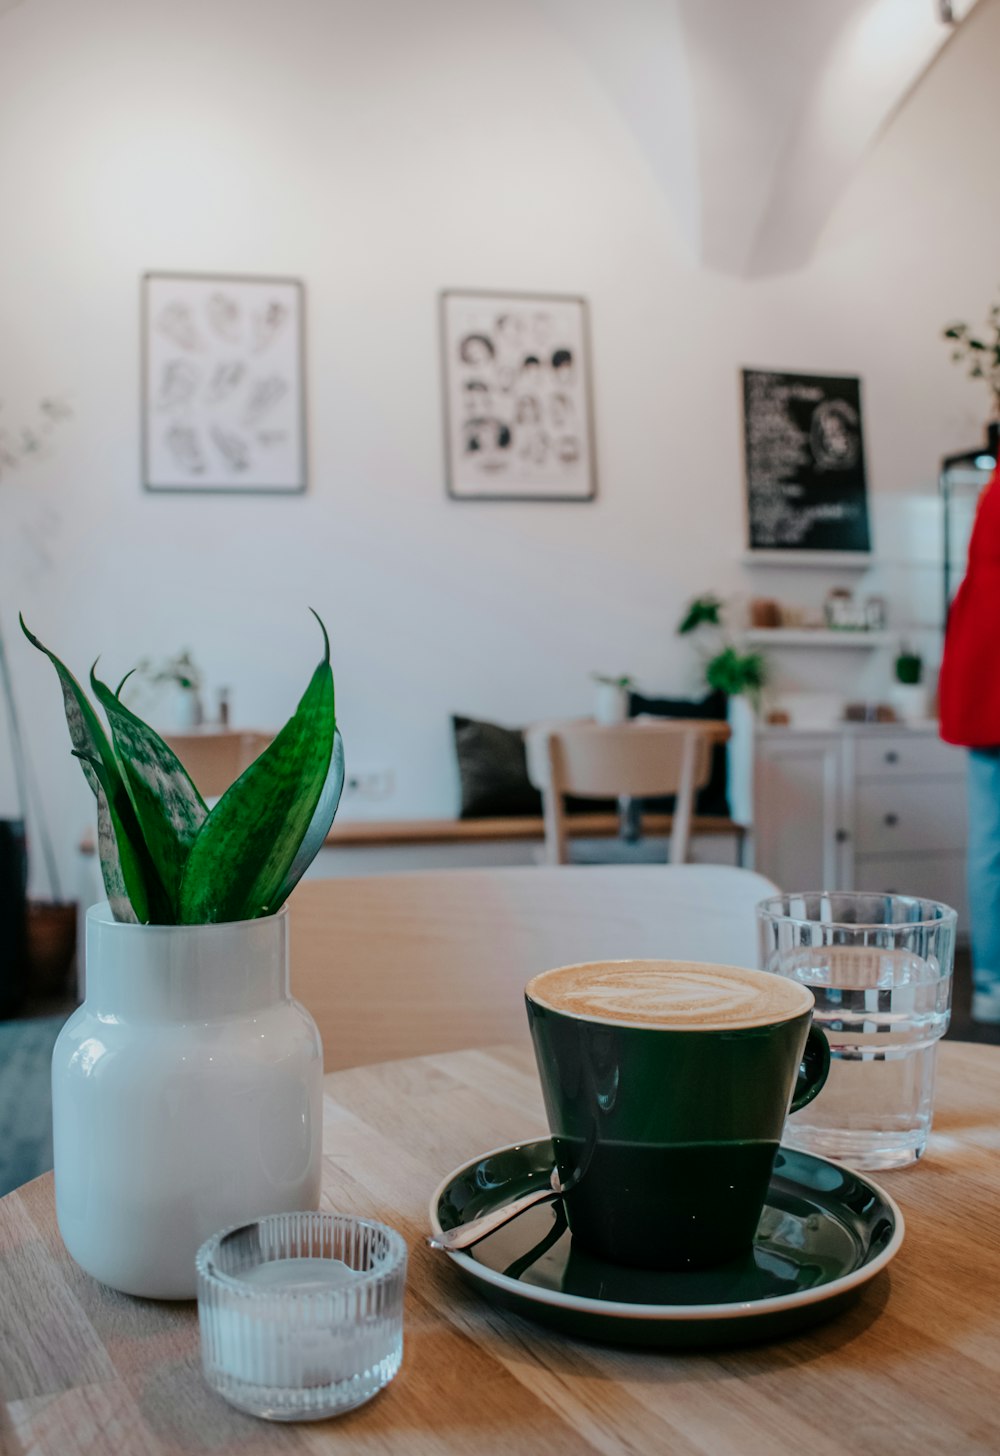 a table with a cup of coffee and a plant in a vase